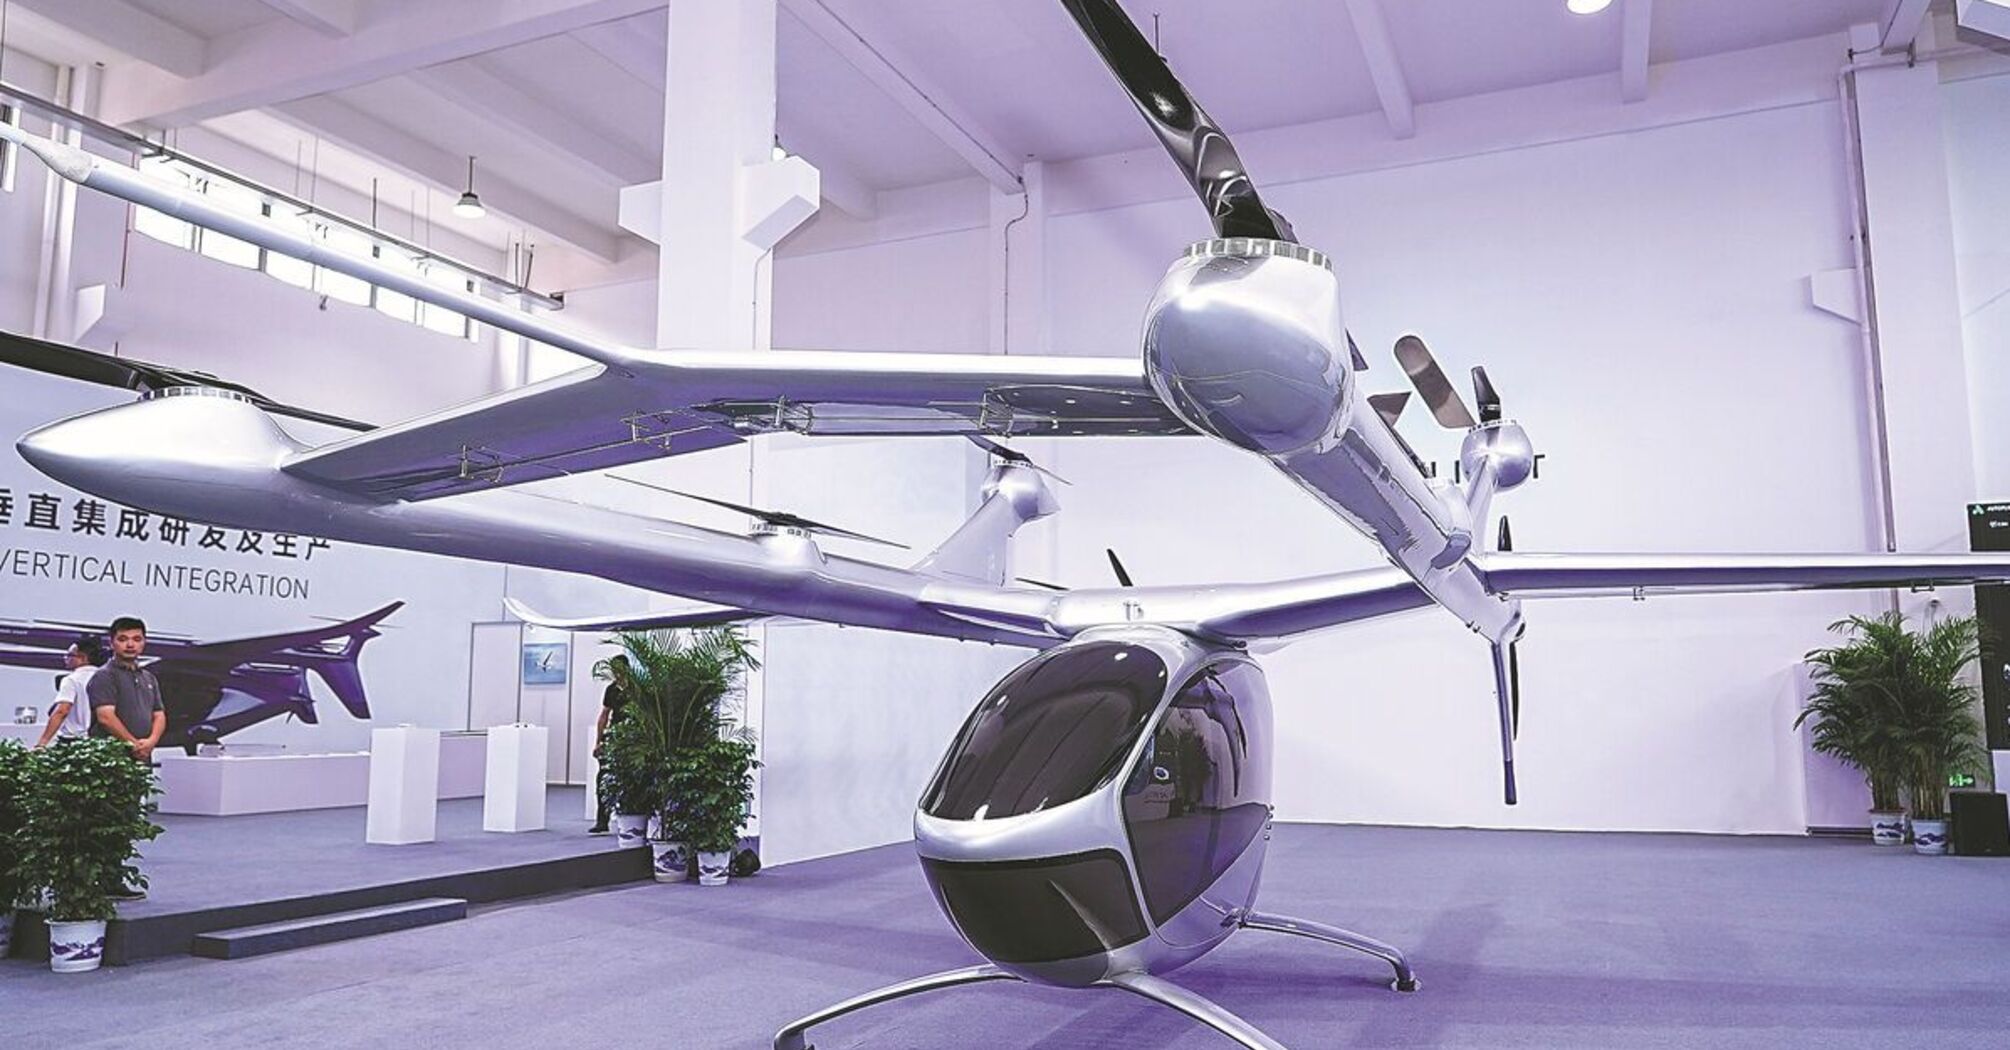 The AutoFlight eVTOL is demonstrated at the company's plant in Kunshan